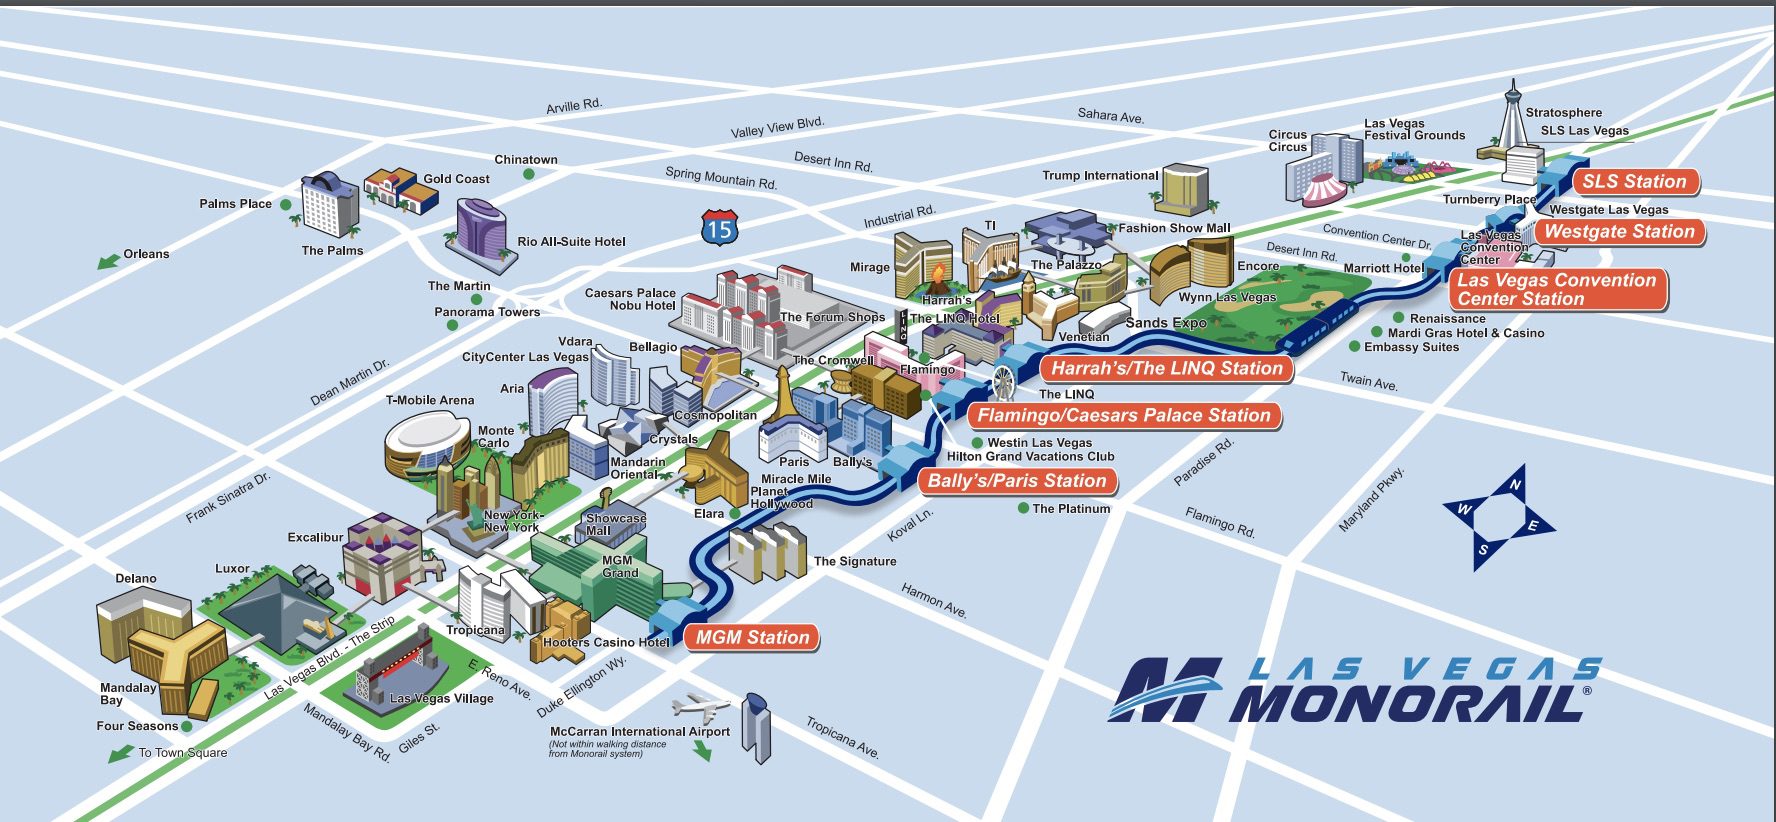 Monorail Map shows going up and down the strip